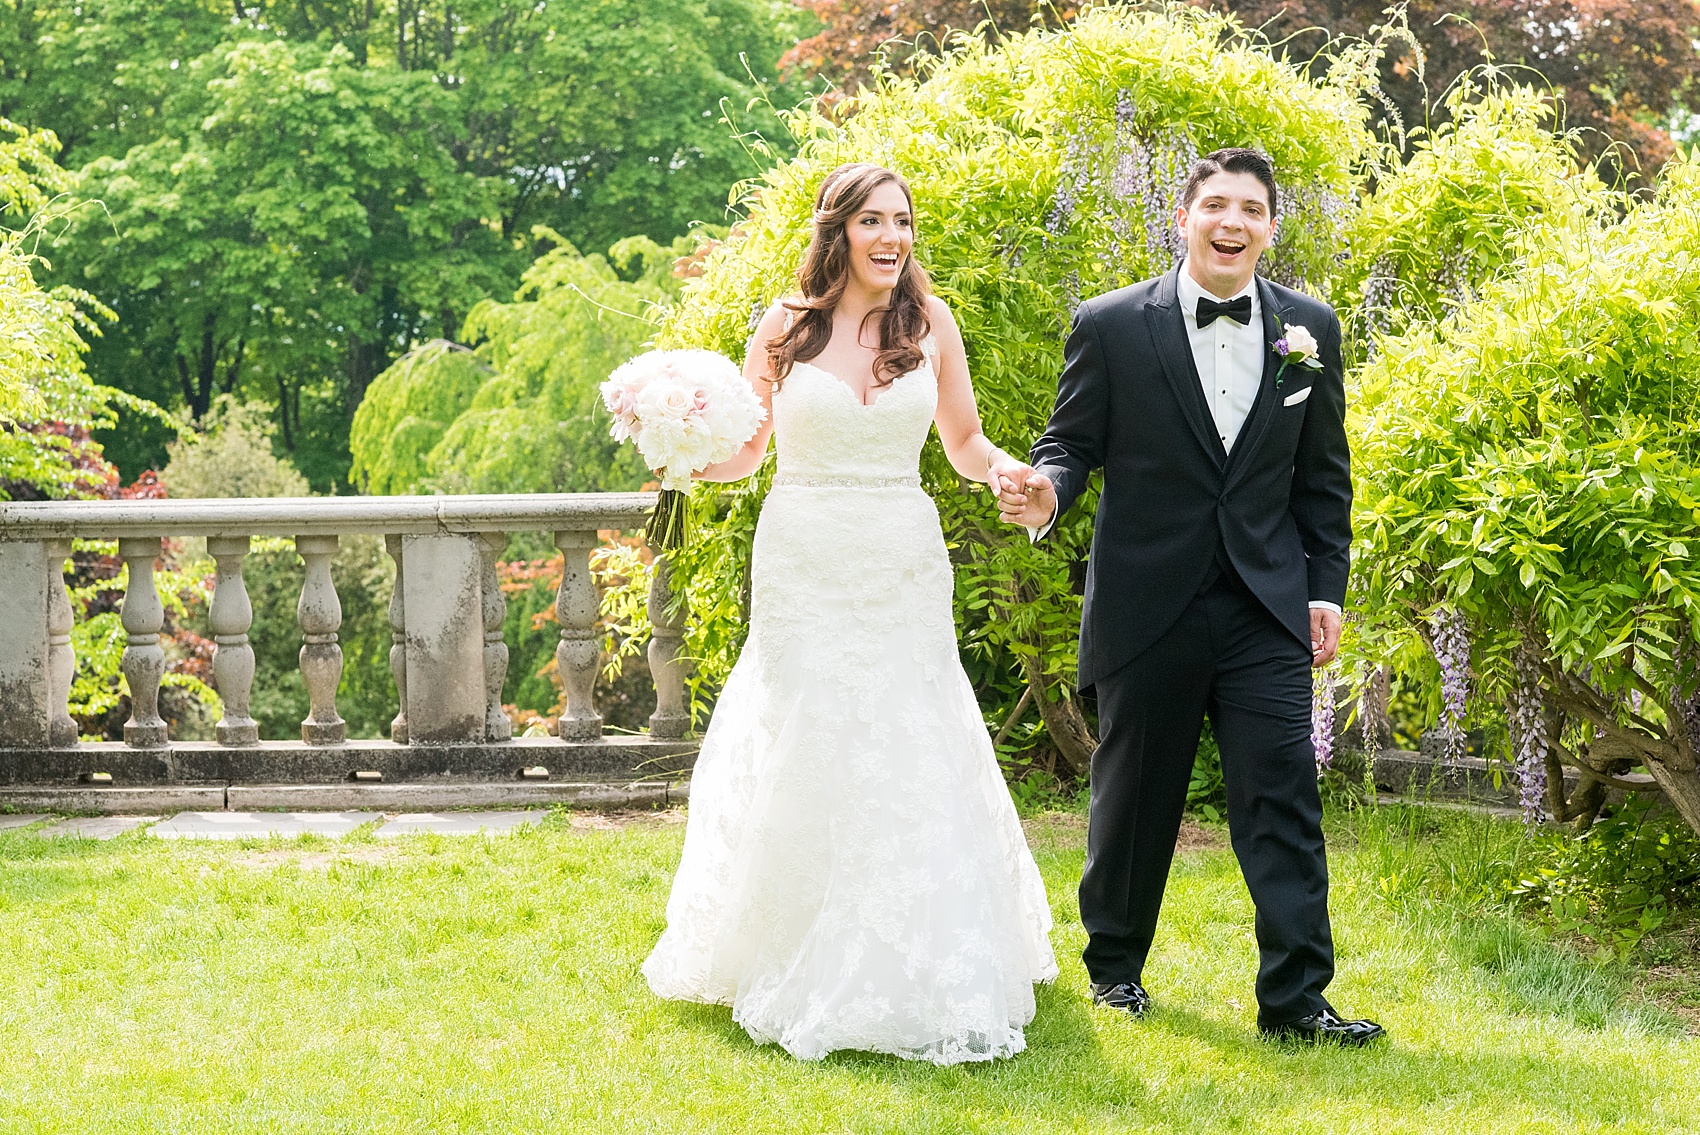 Bride and groom first look at a Skylands Manor wedding. Images by Mikkel Paige Photography, NJ wedding photographer.